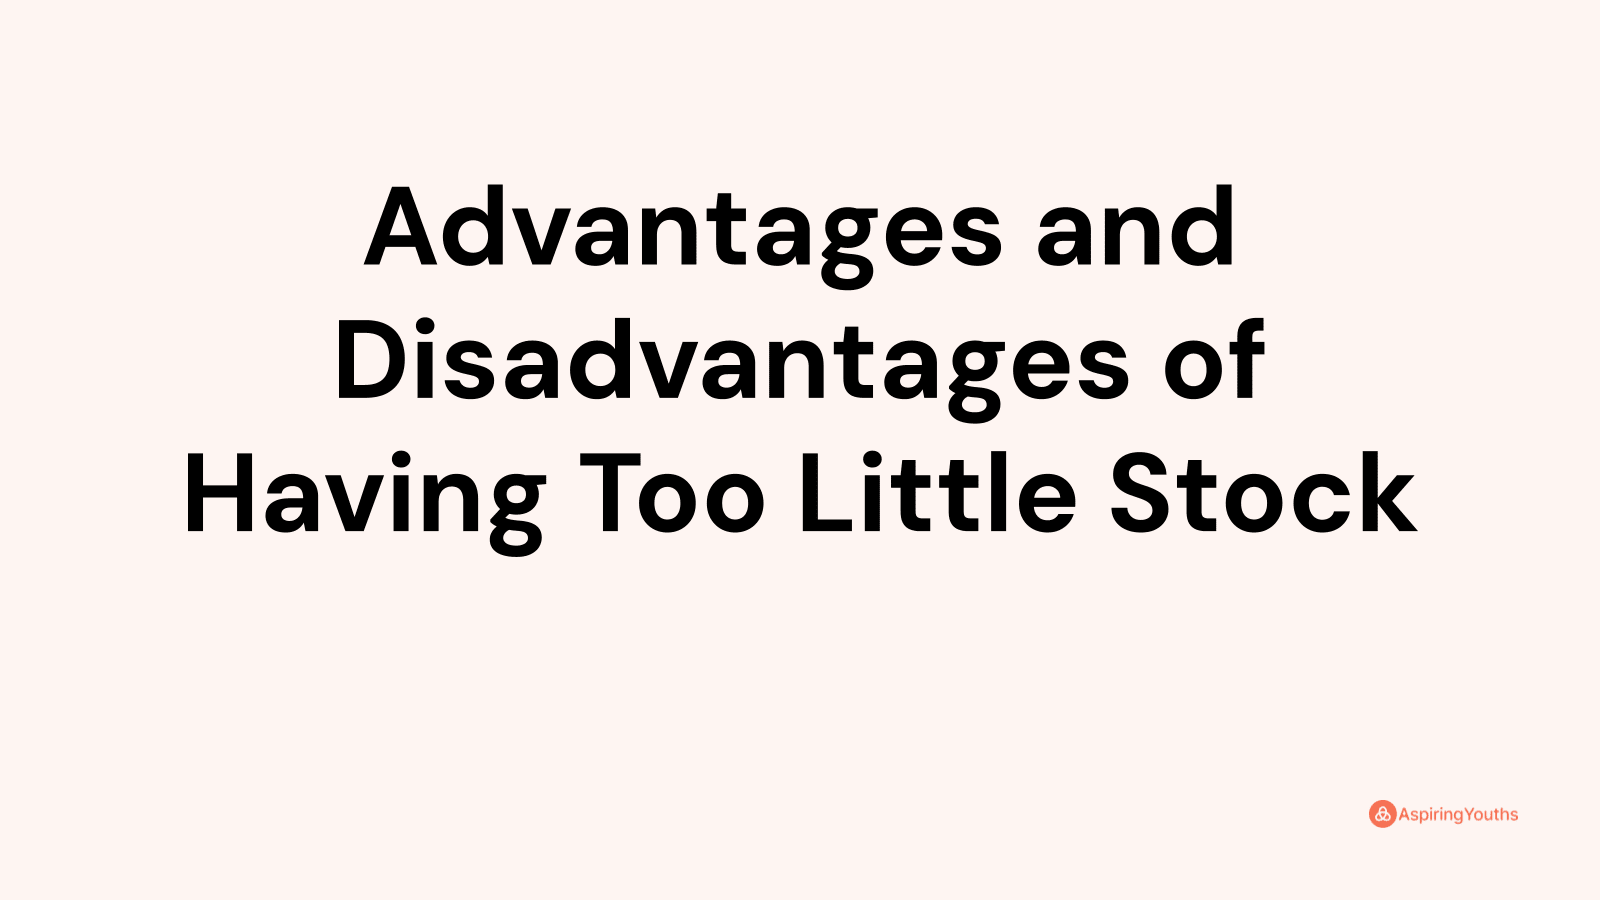 Advantages and disadvantages of Having Too Little Stock